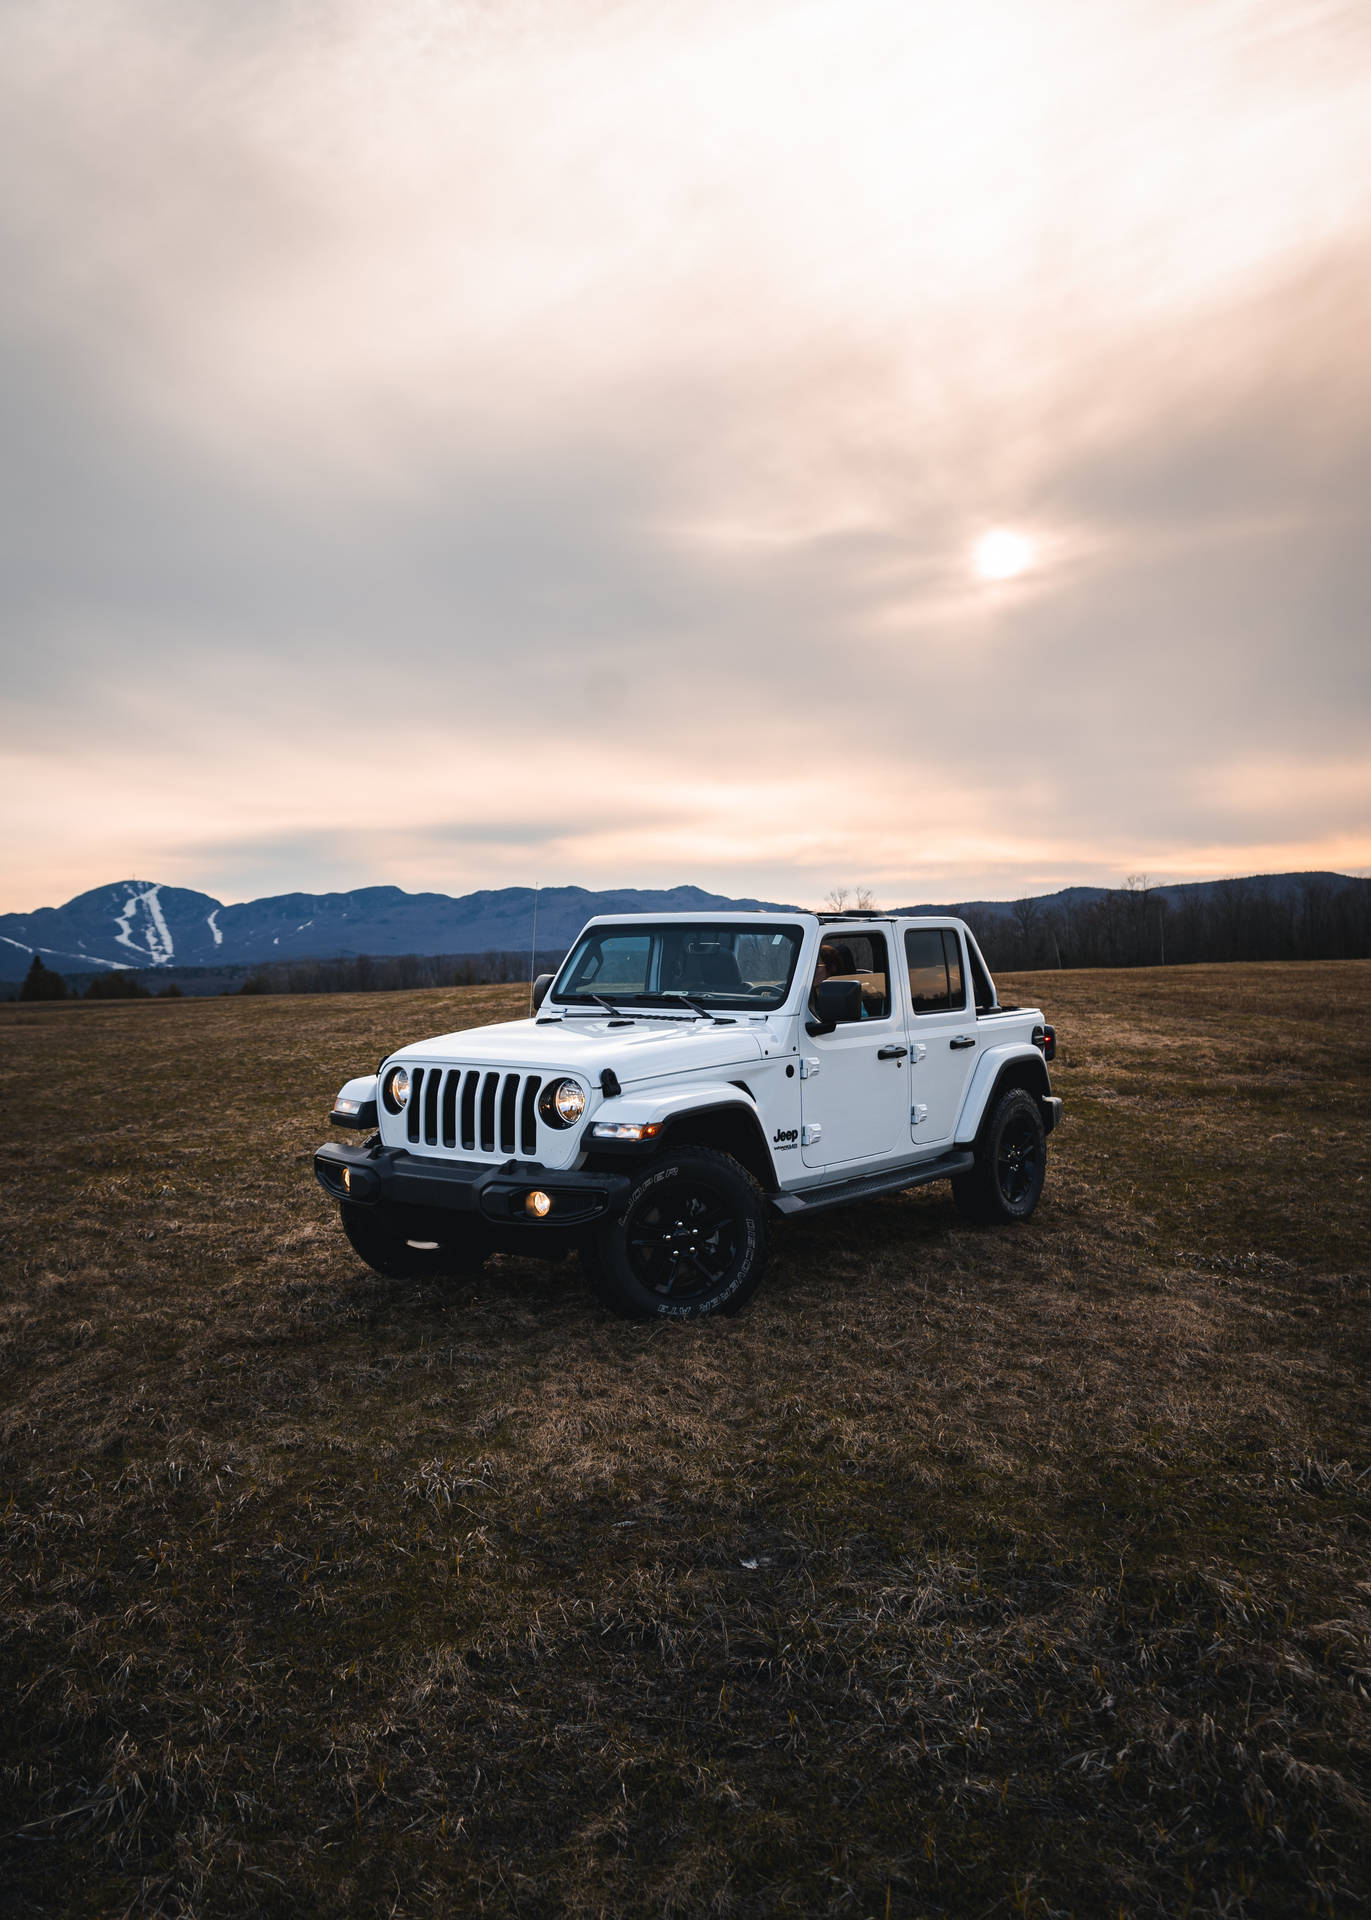 Clean White Wrangler Jeep Background